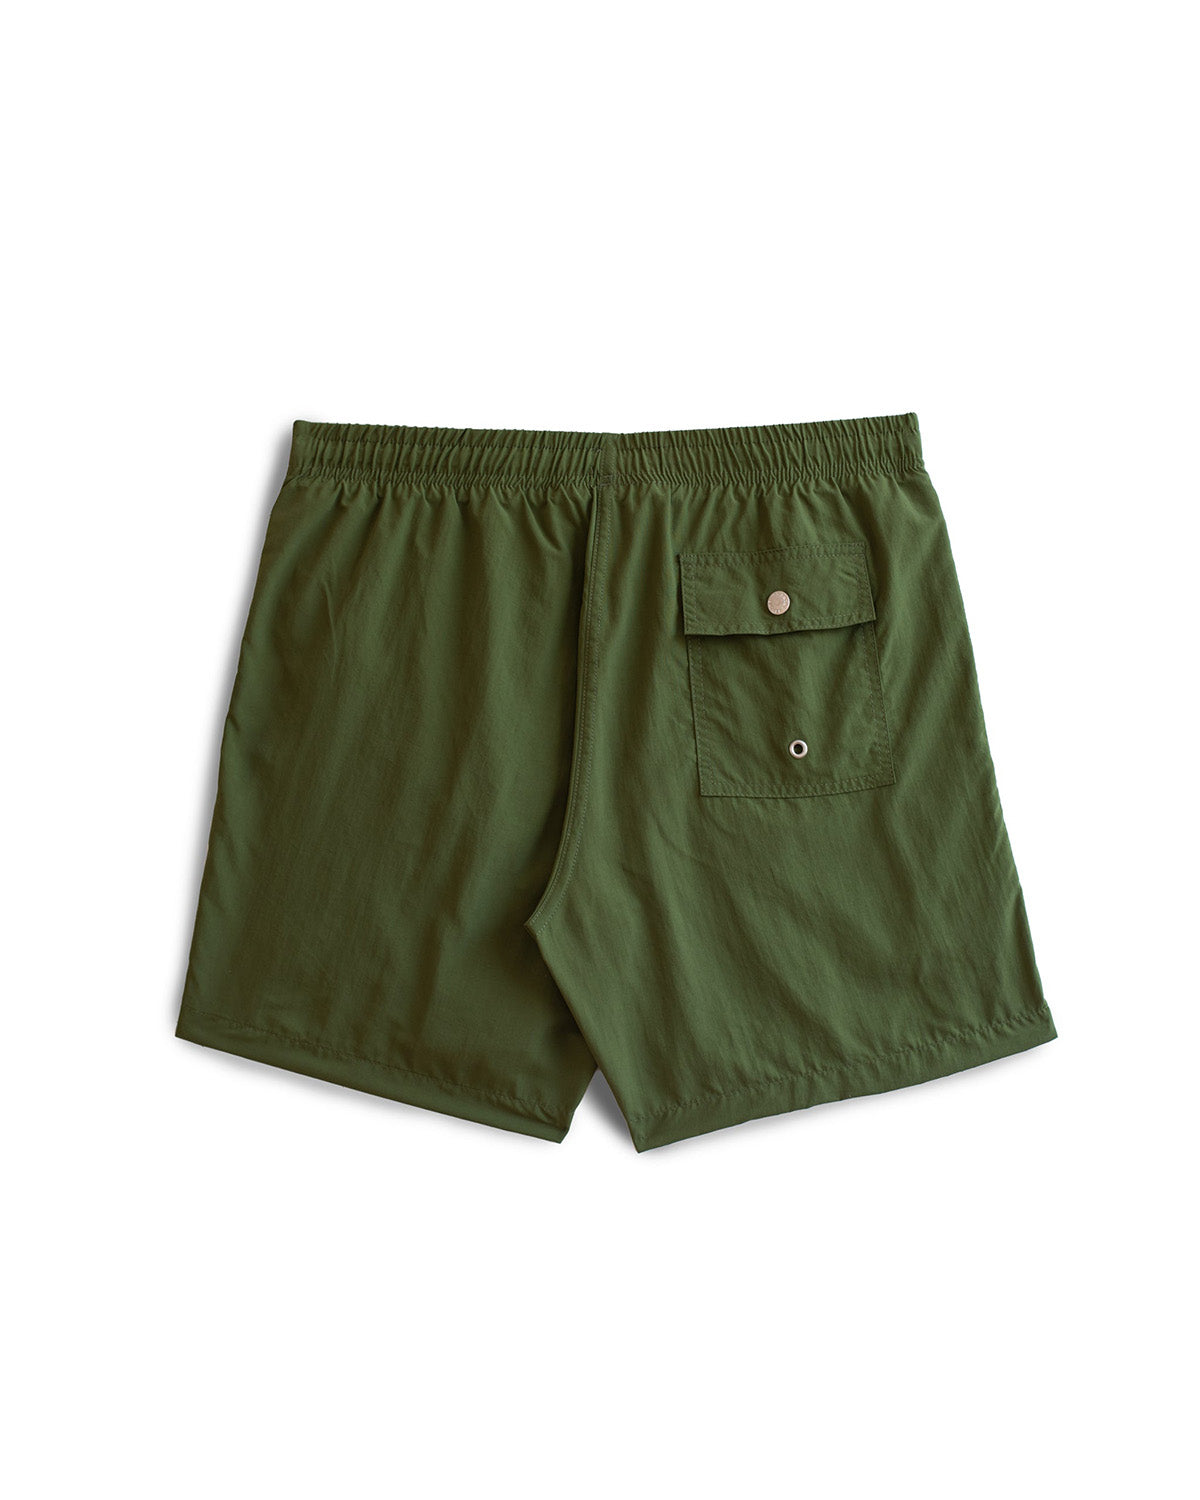 Solid Olive Swim Trunk back view